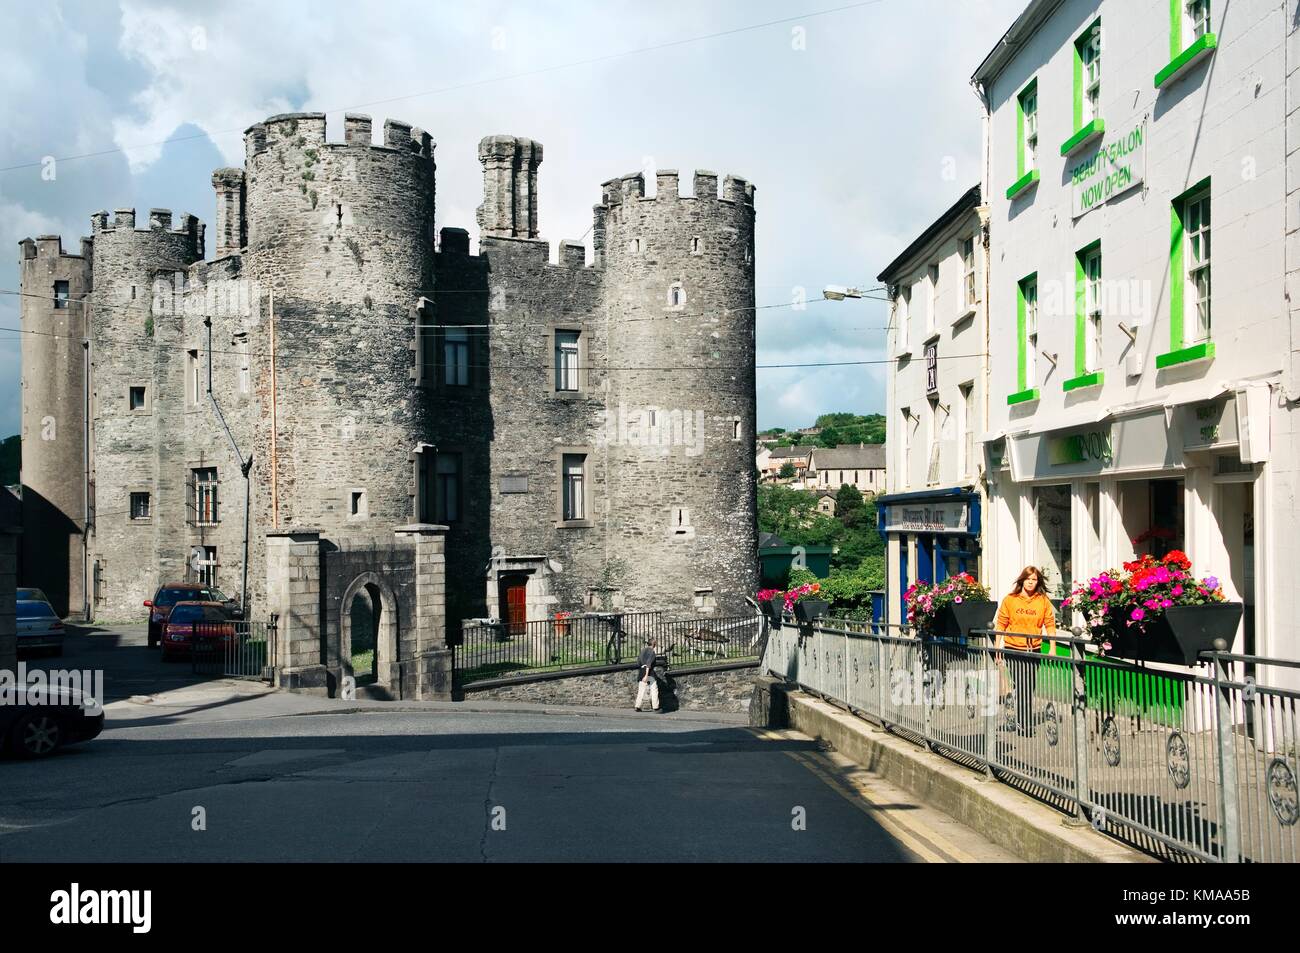 The renovated 13th C. castle in the centre of the lively town of Enniscorthy on the highest navigable point of the River Slaney. Stock Photo